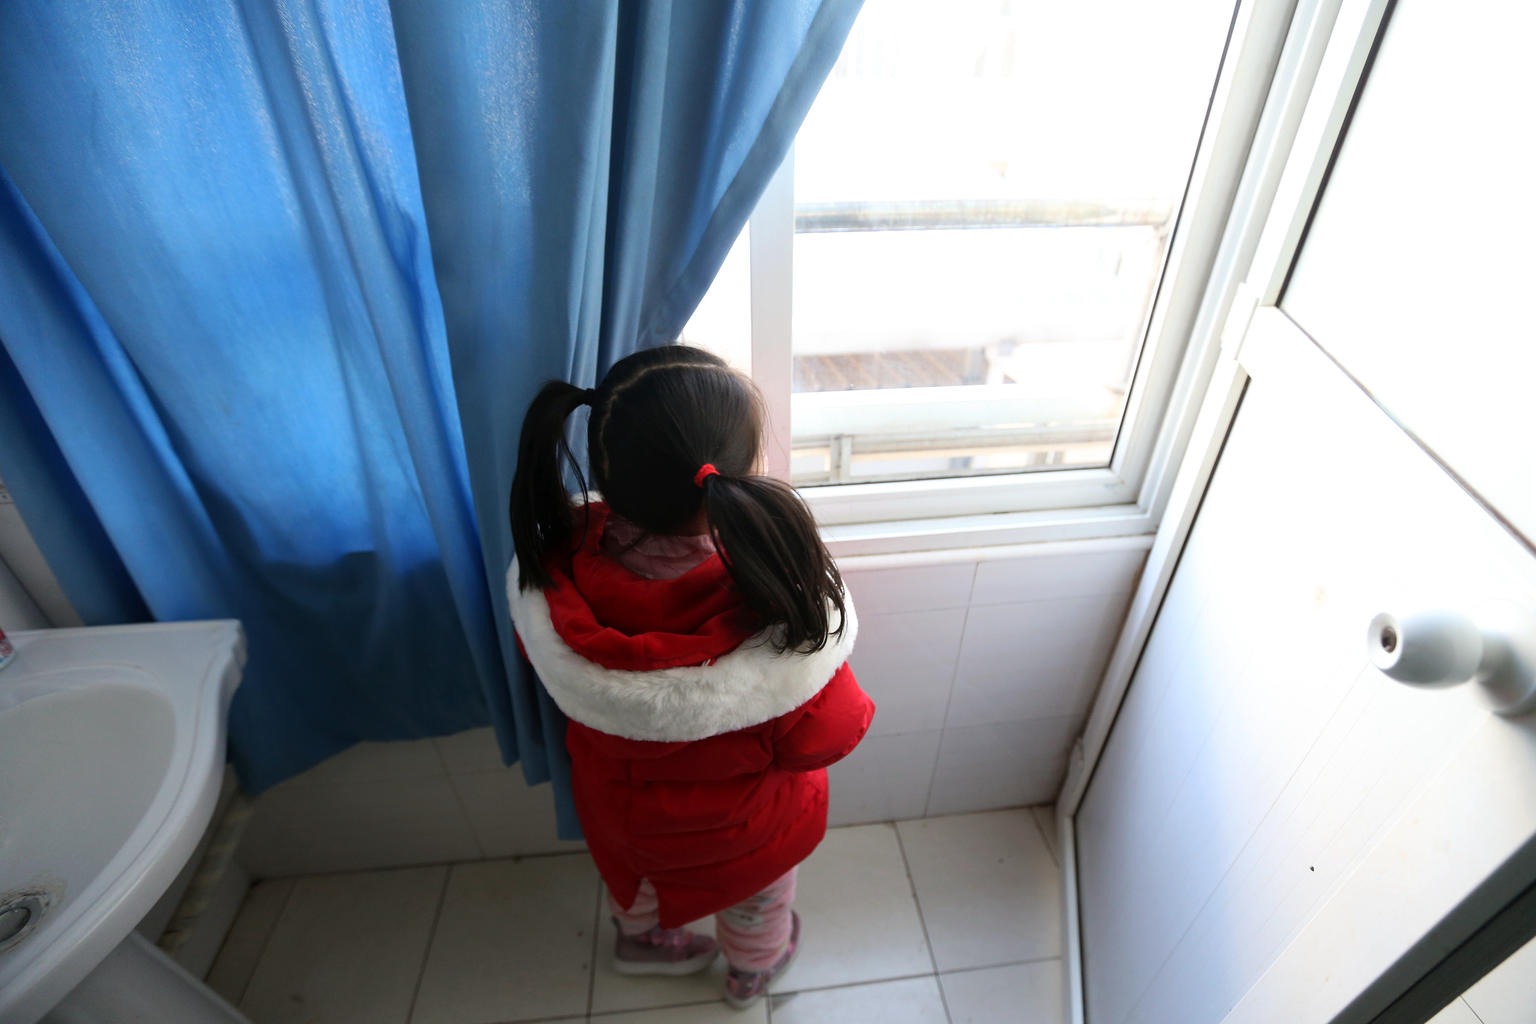 a young girl is looking by the window in a bathroom 